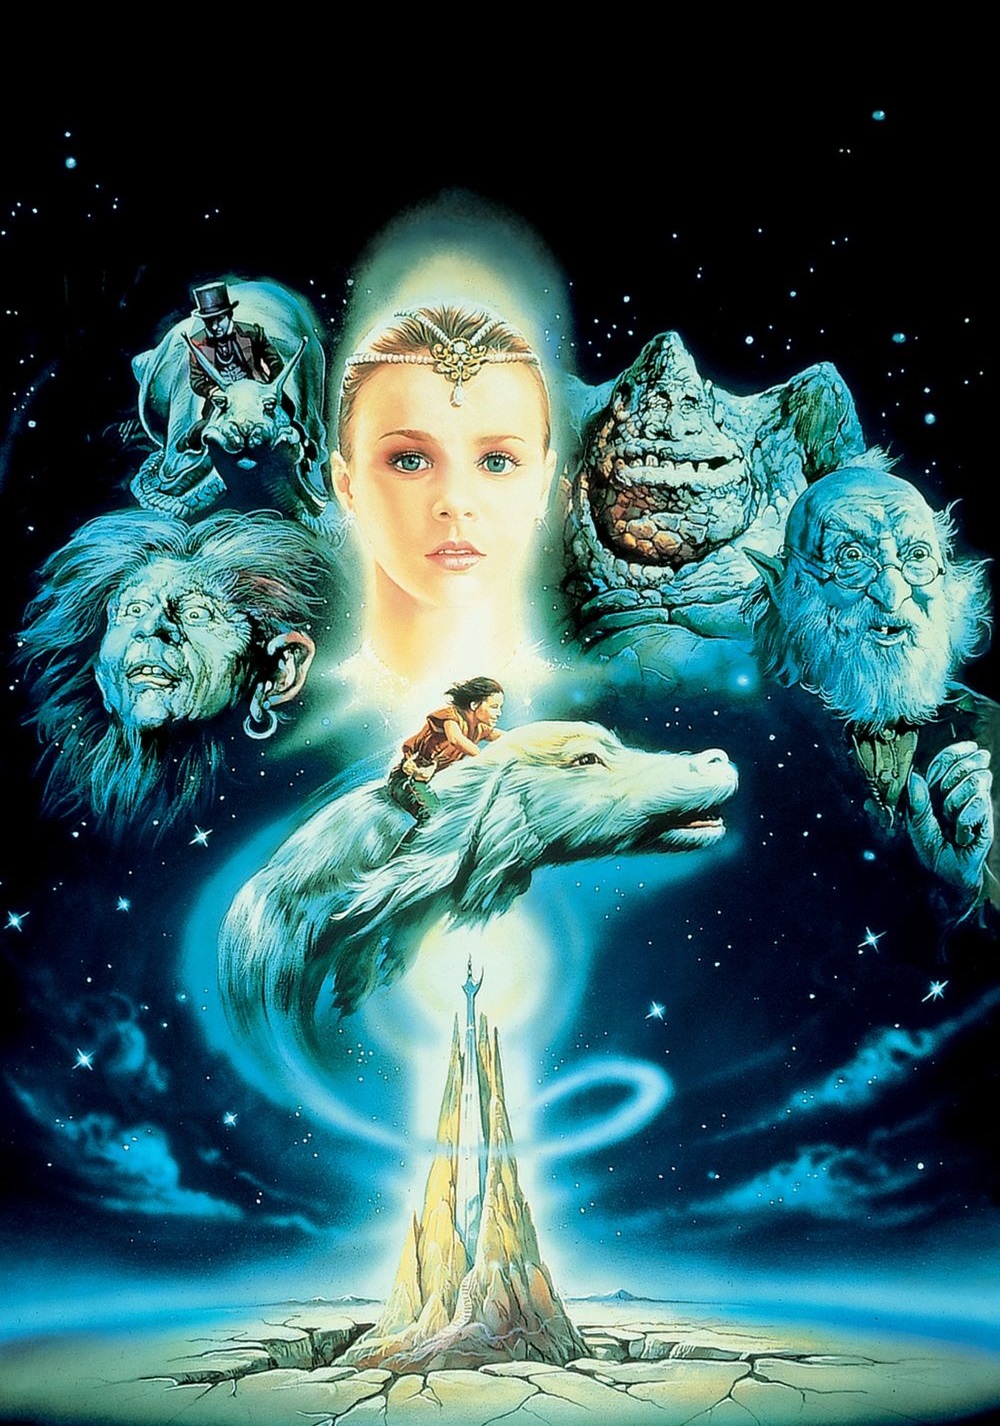 The Neverending Story Picture Image Abyss